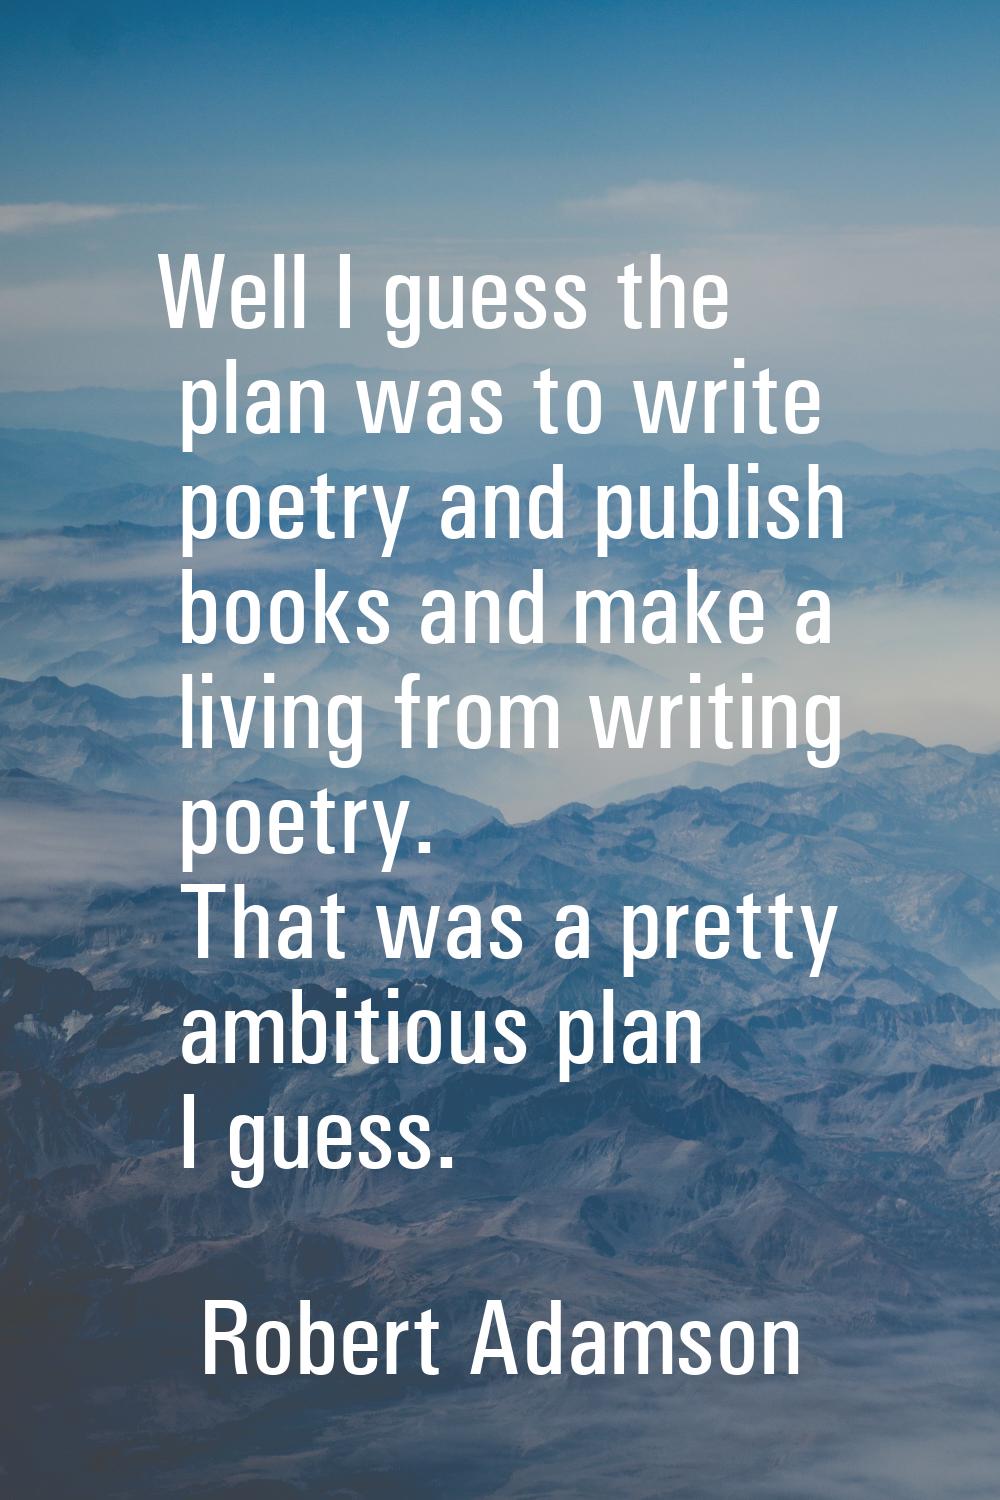 Well I guess the plan was to write poetry and publish books and make a living from writing poetry. 